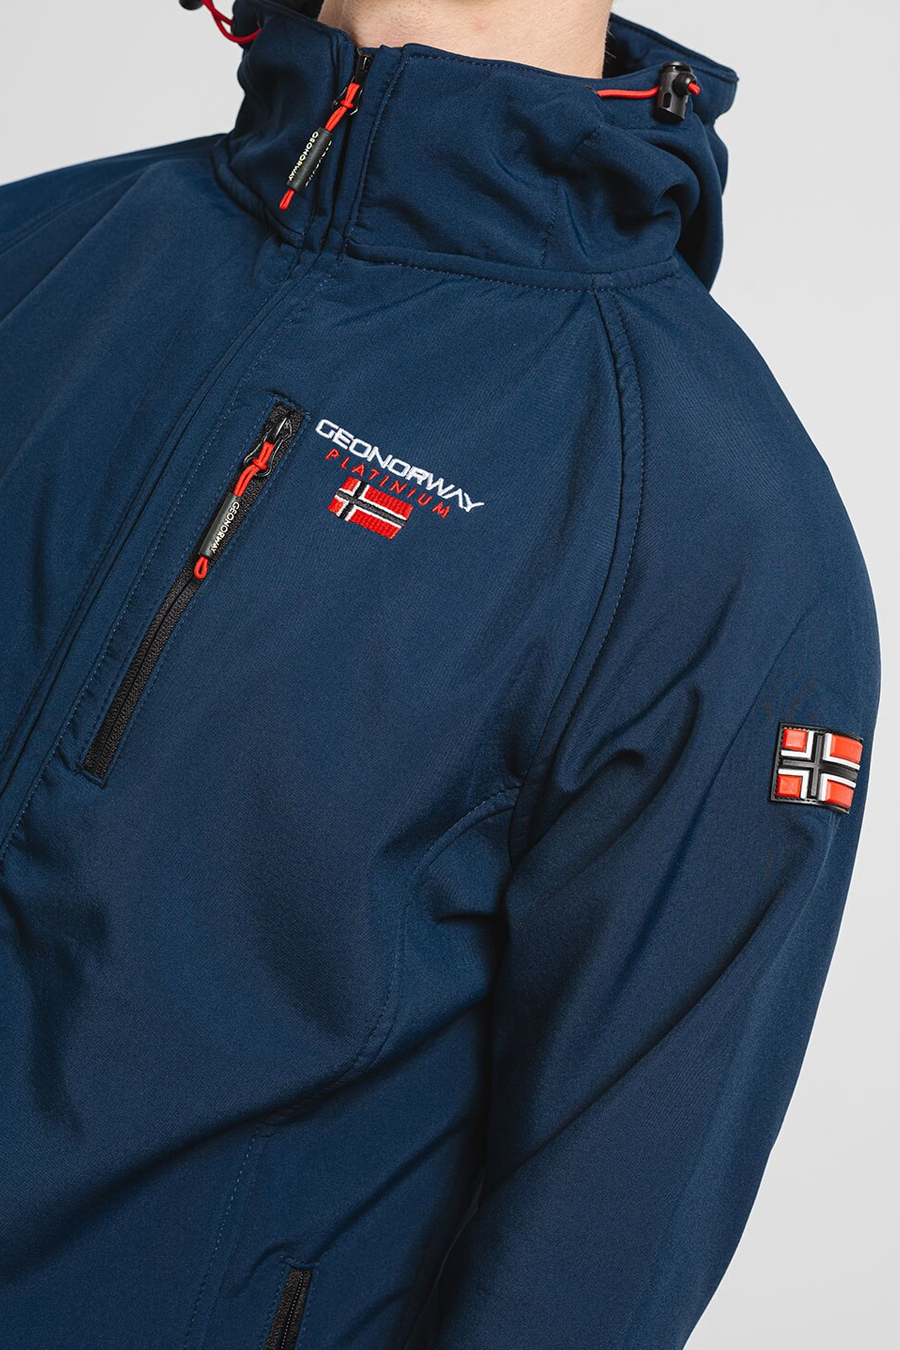 Jacket GEOGRAPHICAL NORWAY TAKITO-Navy